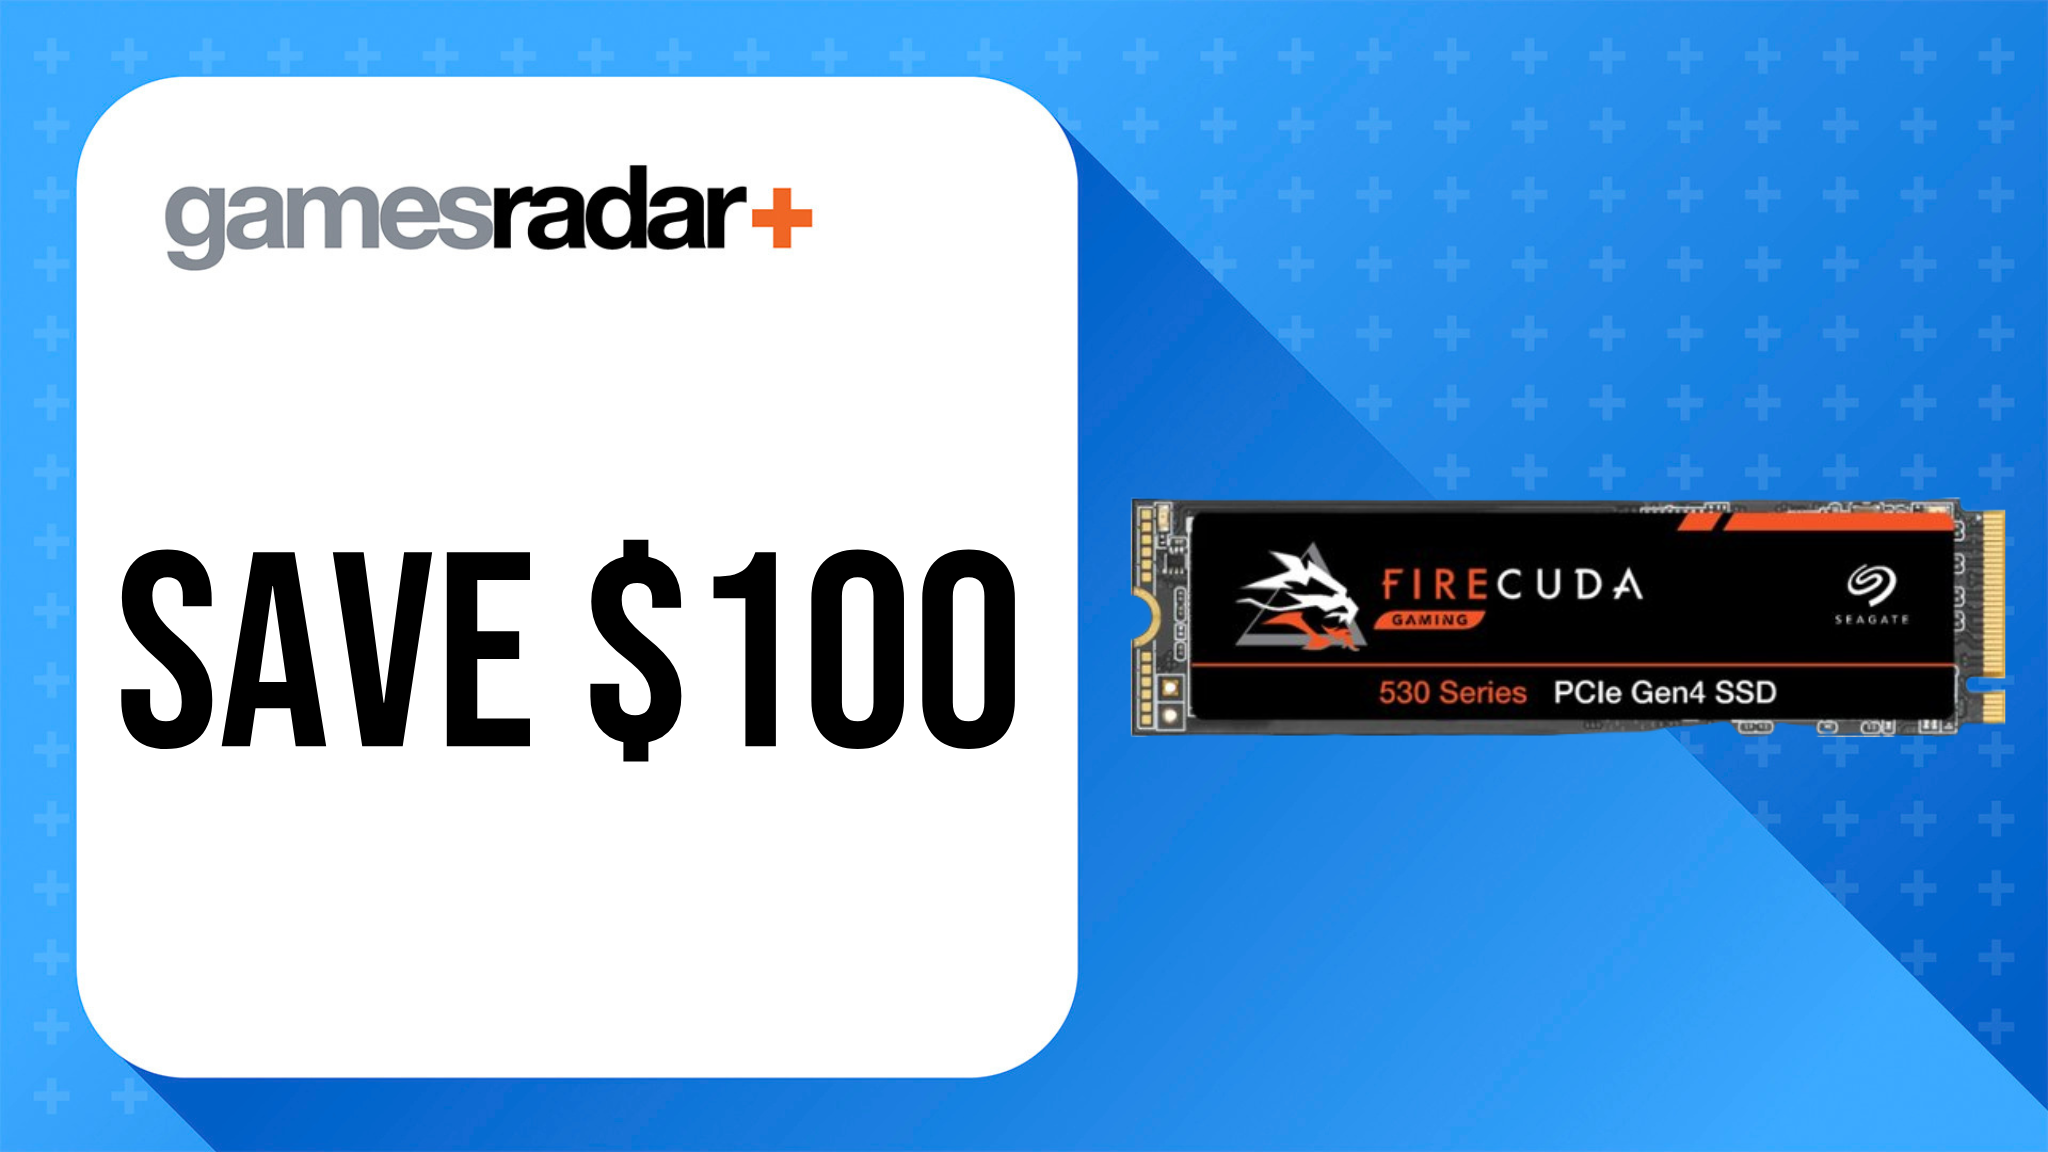 Seagate FireCuda 530 1TB deal image with $100 saving stamp and blue background